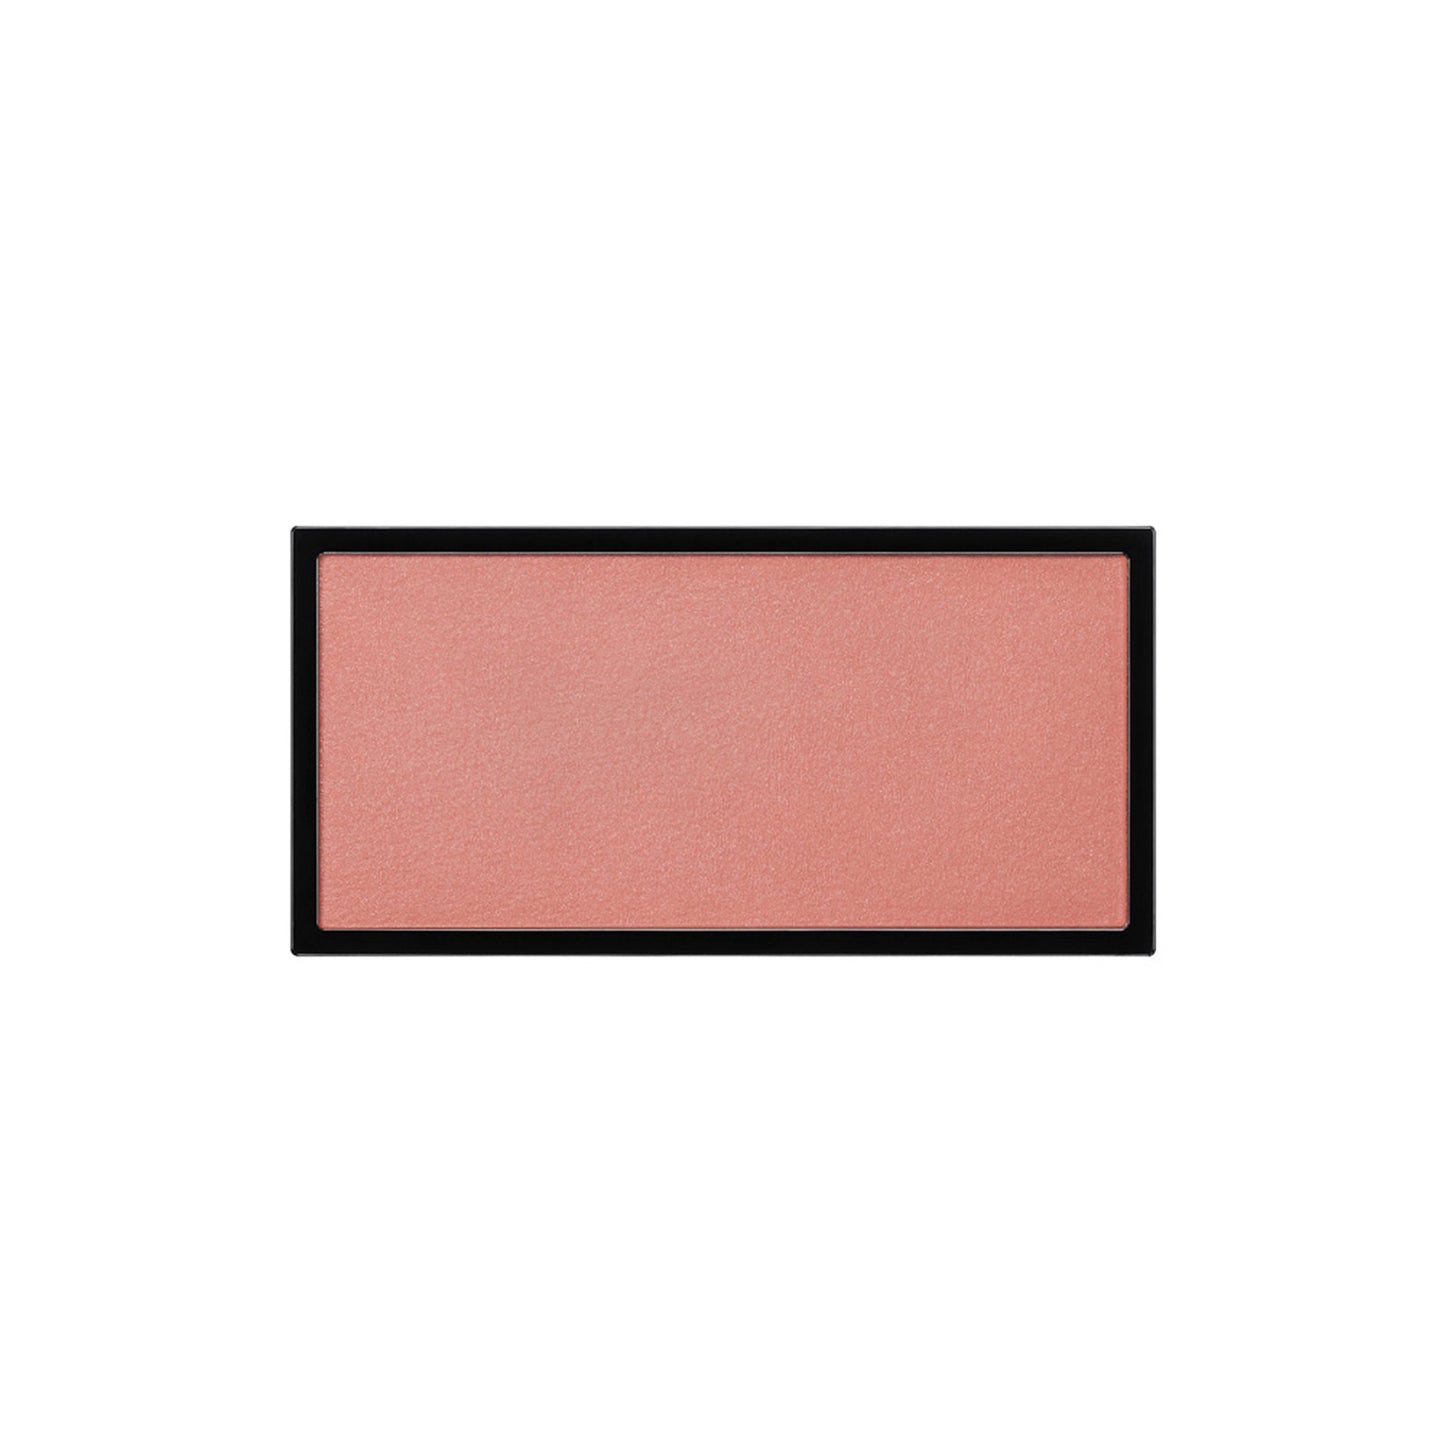 A rectangle shaped powder blush pan in a soft rose shade